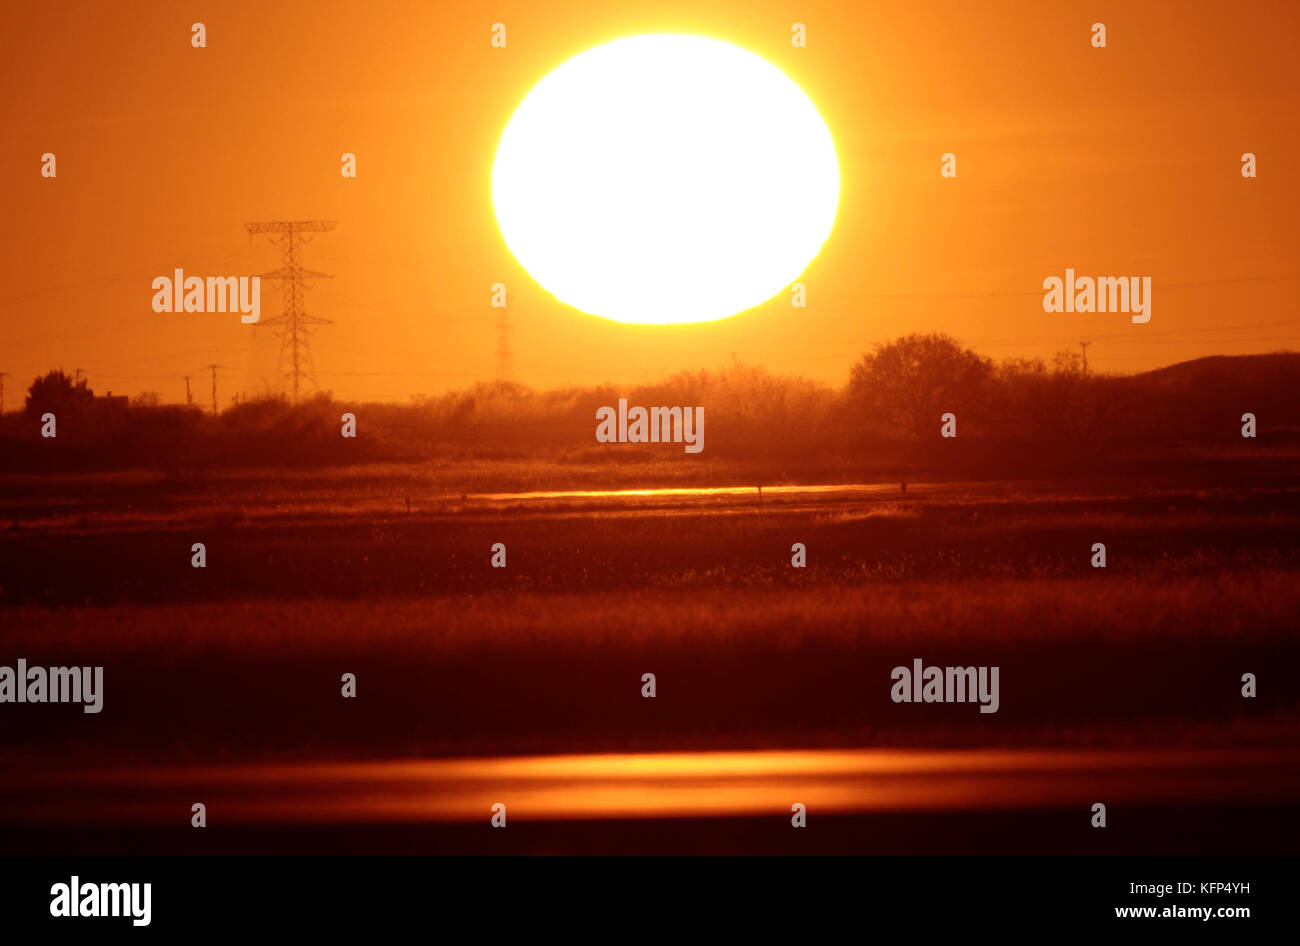 Sun seen at sunset on the horizon to the west of the capital of Sonora, located in the desert northwest of Mexico.    The Sun is a star of spectral type G2 which lies in the center of the solar system and is the largest source of electromagnetic radiation of this planetary system. Earth and other bodies orbit around the sun.    Distance to Earth: 149,600,000 km  Radio: 696,000 km  Surface temperature: 5,778 K  Mass: kg 1,989E30  Absolute size: 4.83  Magnitude: -26.74 Stock Photo